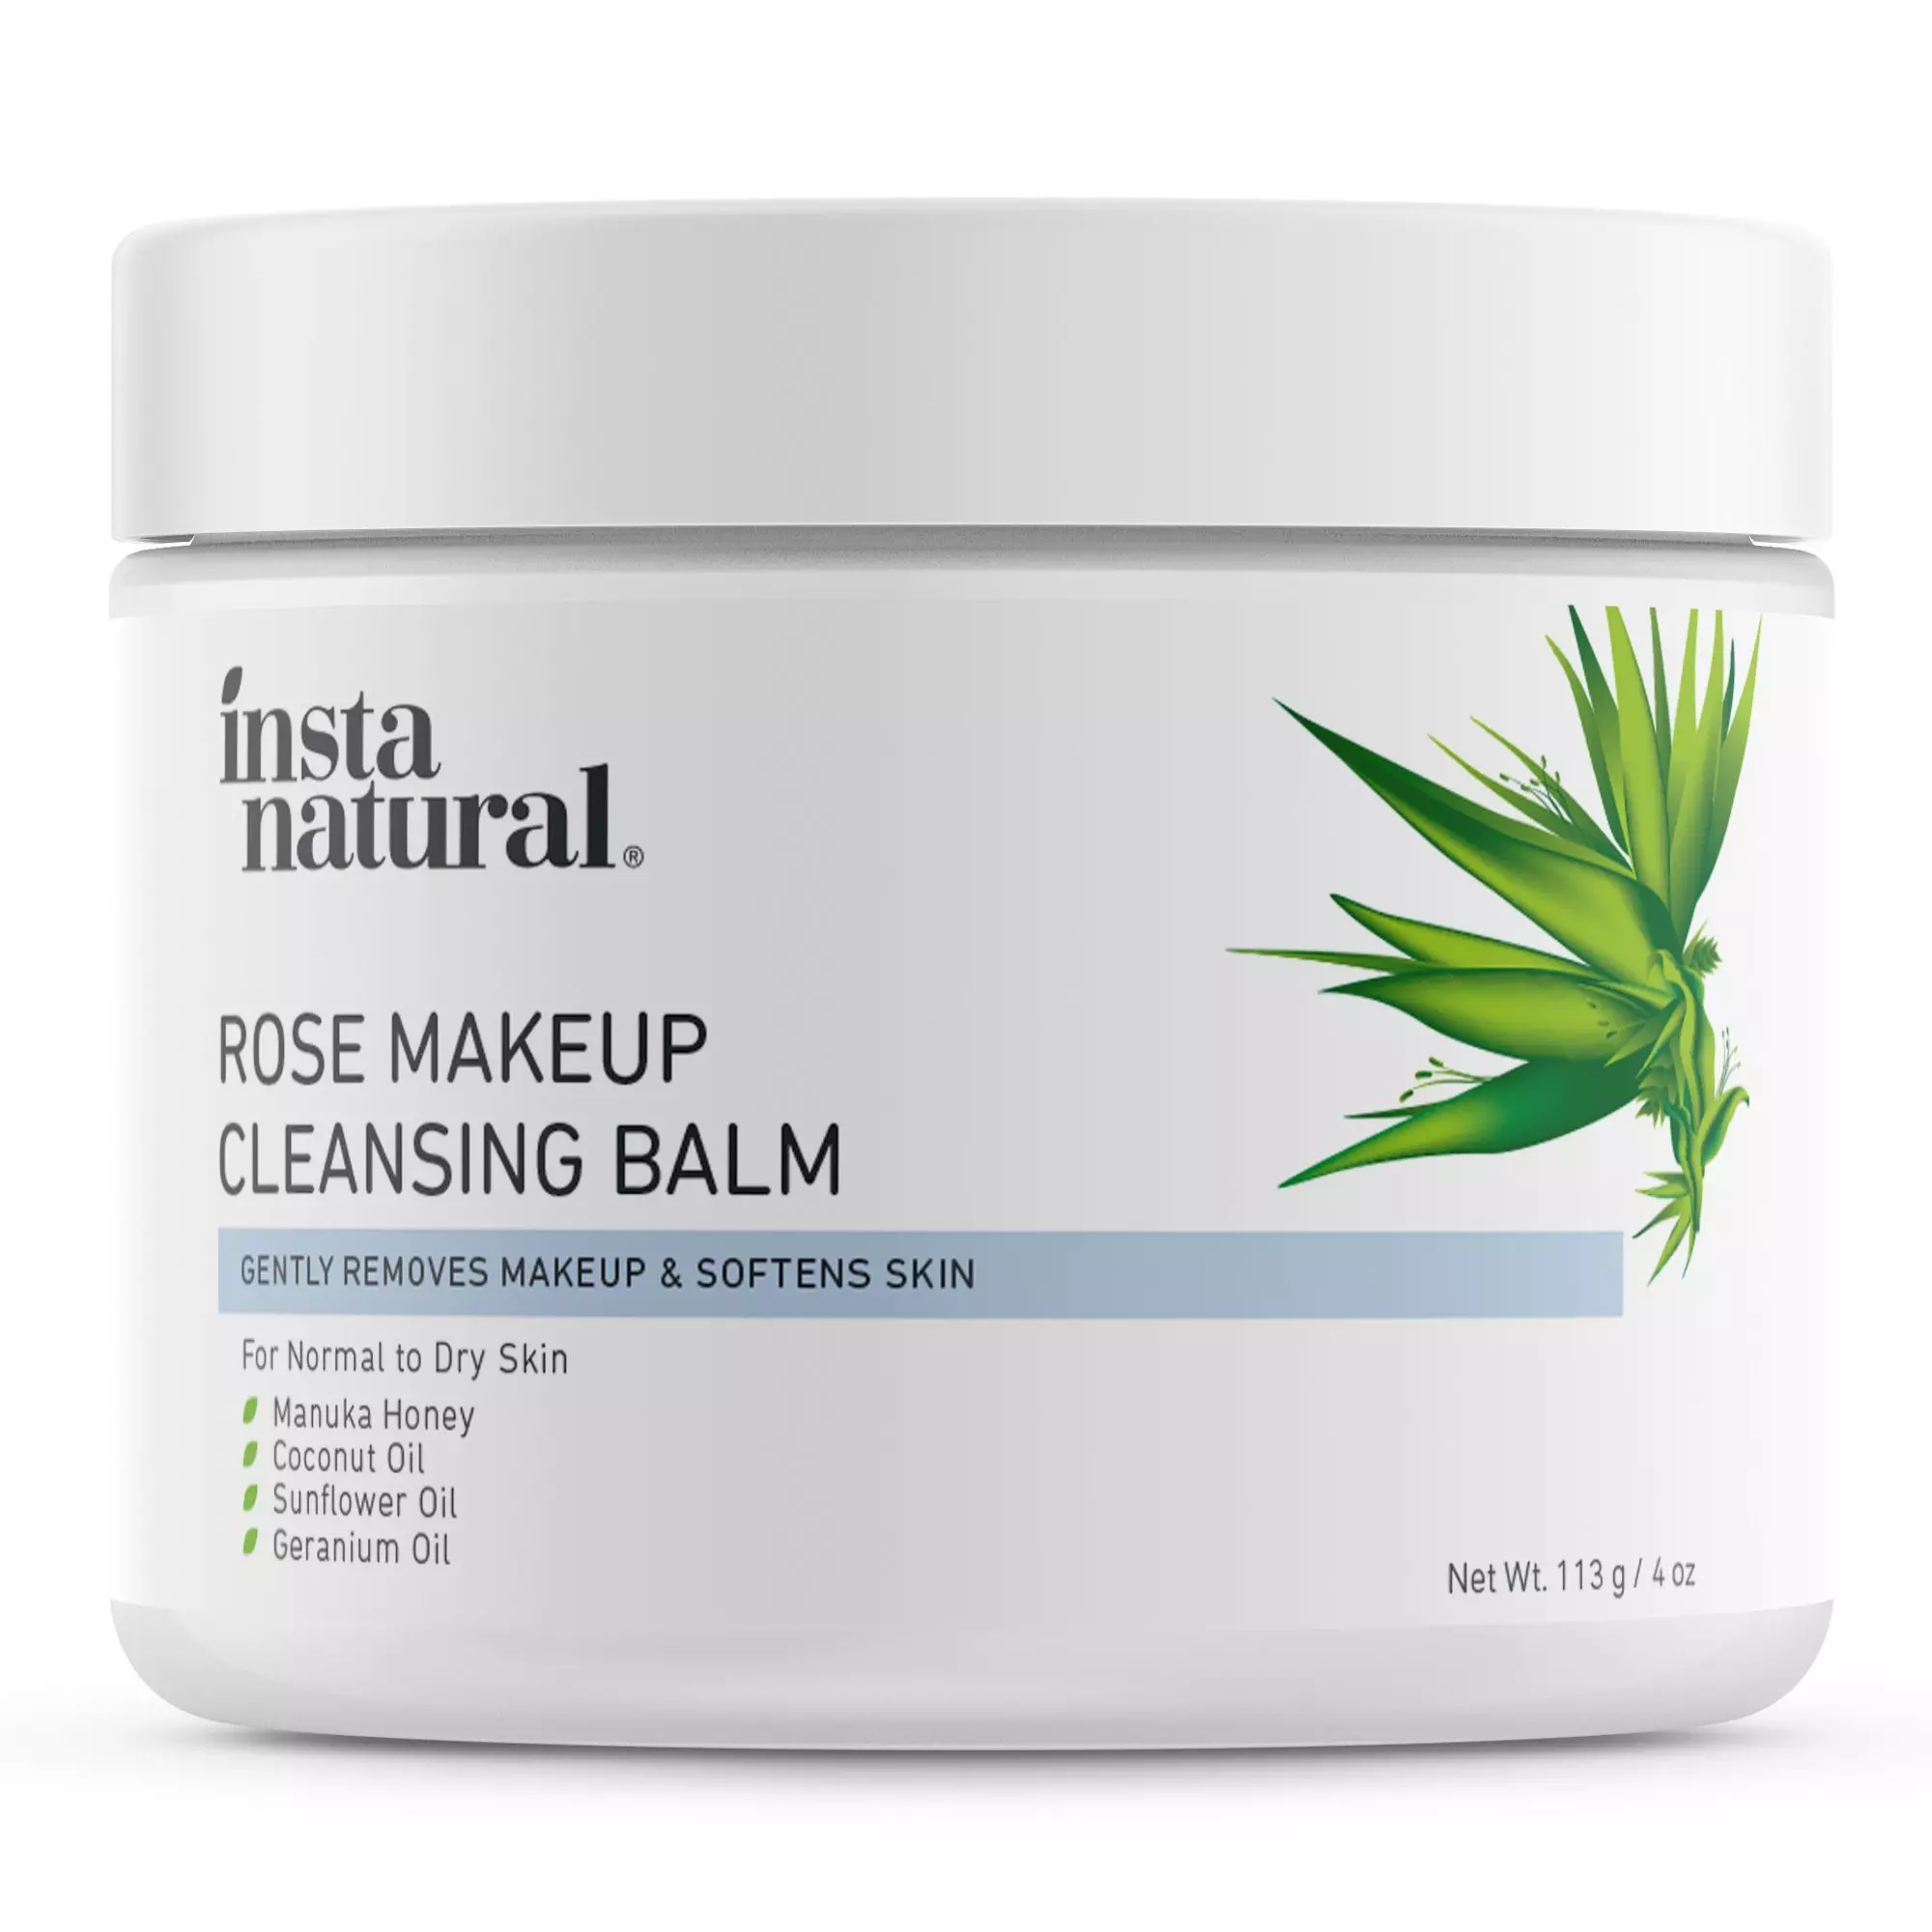 Rose Cleansing Balm ? Natural Facial Cleanser & Makeup Remover with Coconut Oil and Manuka Honey ? Instantly Removes Waterproof Mascara & Face Makeup ? Gently Double Cleanse and Purify Skin - 4 oz